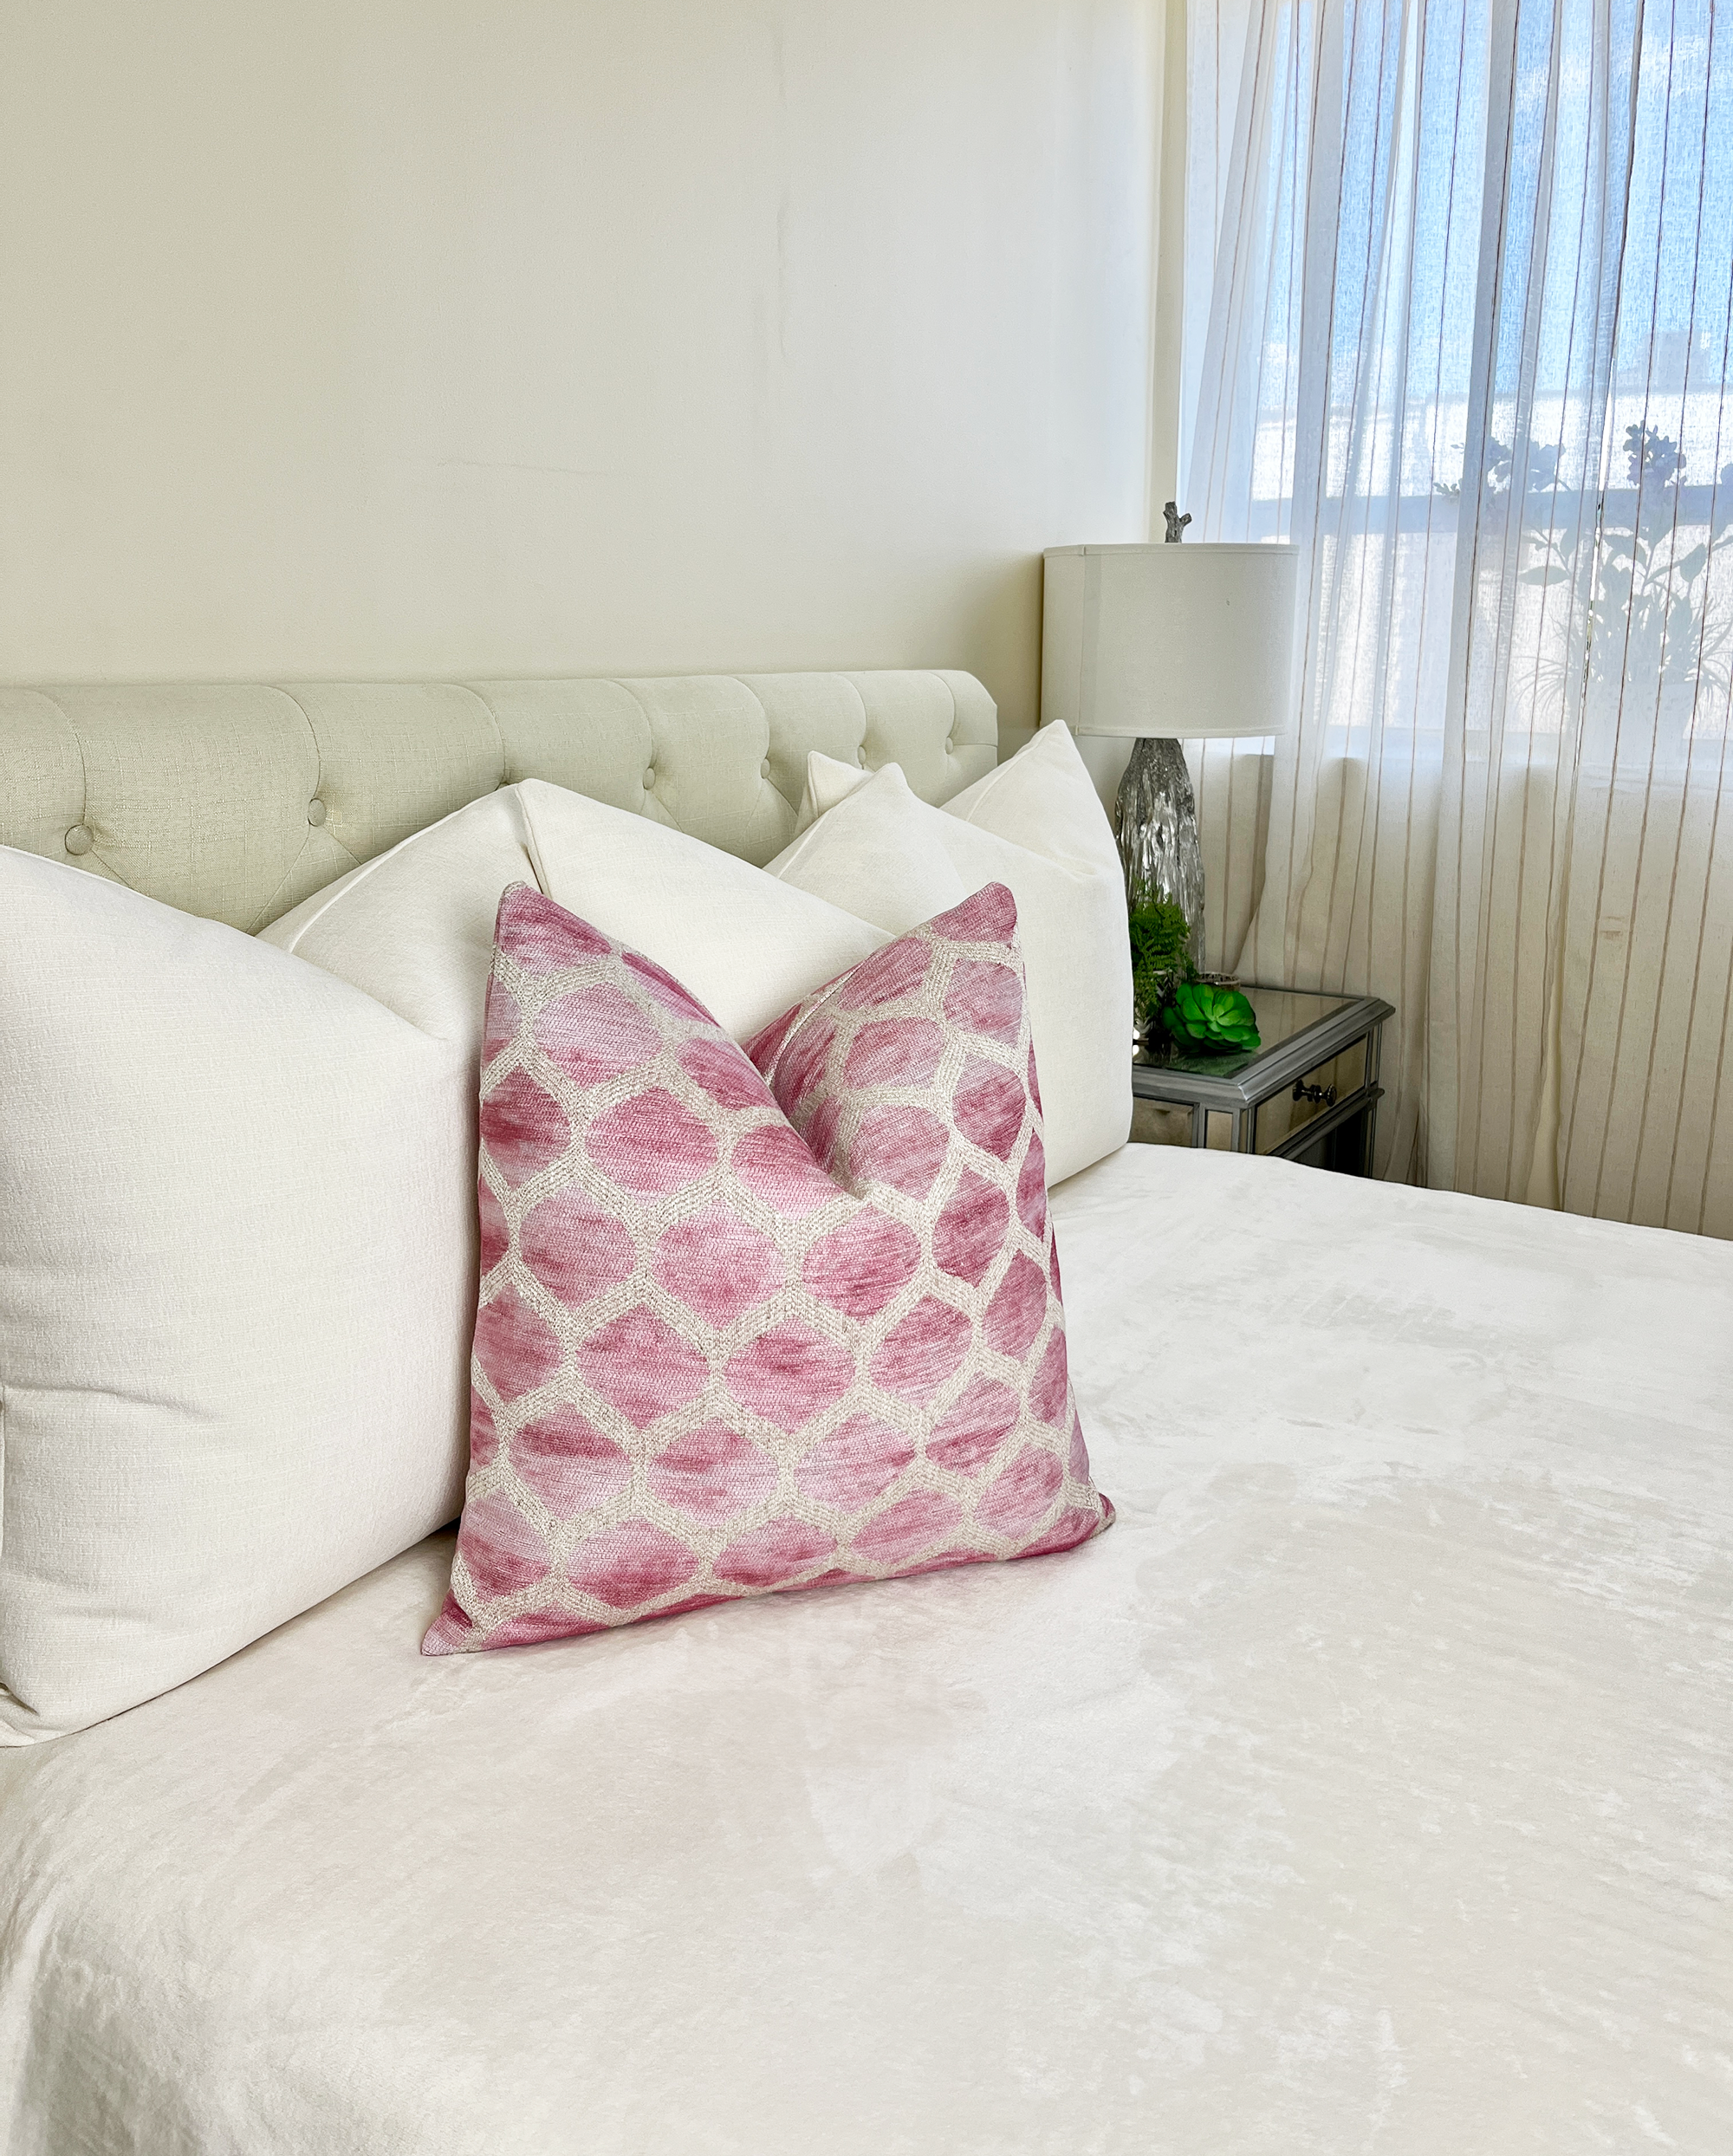 https://smithyhomecouture.com/wp-content/uploads/2022/07/Pink-and-Cream-lattice-bed.png